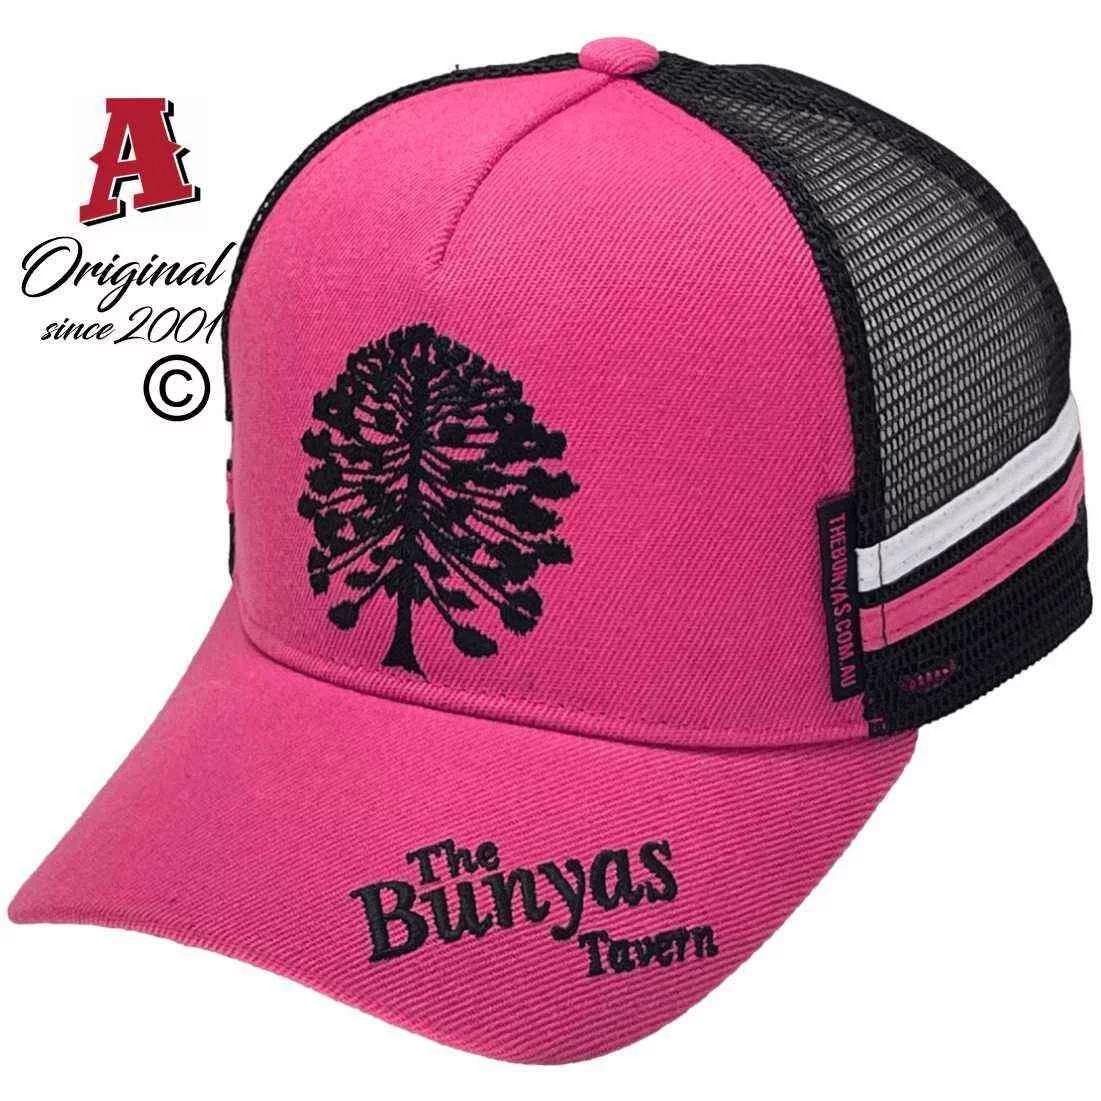 The Bunyas Tavern Bunya Mountains QLD Low Profile Midrange Aussie Trucker Hats with Australian HeadFit Crown and Double SideBands Pink Black